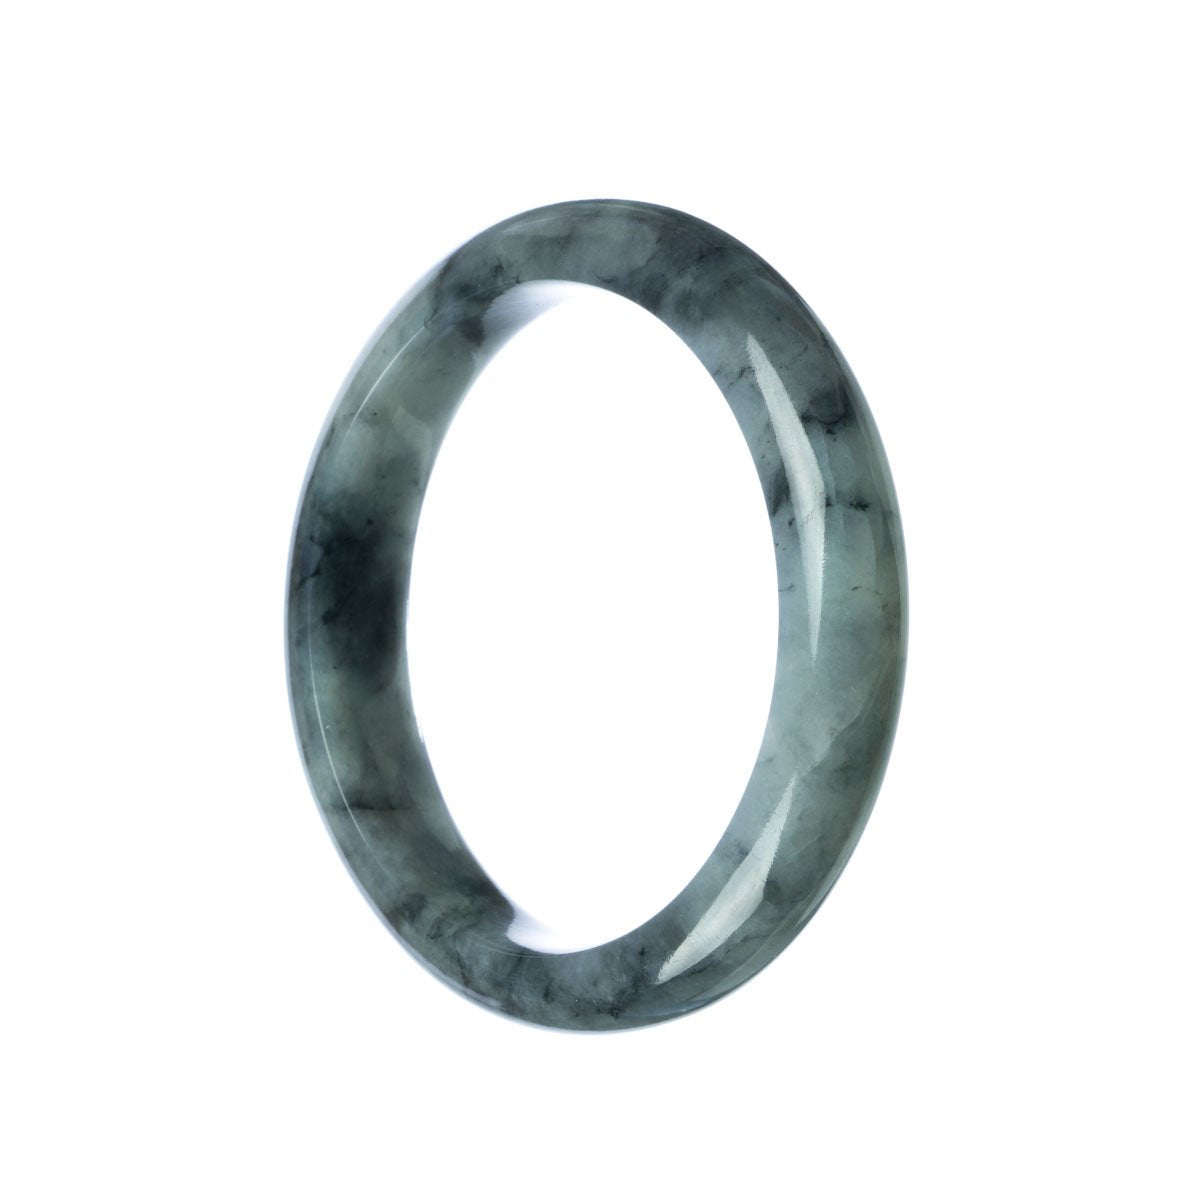 A close-up photo of a grey Burmese jade bangle bracelet. The bracelet has a semi-round shape and a smooth texture, showcasing the natural beauty of the stone. The grey color adds a sophisticated and elegant touch to the accessory.